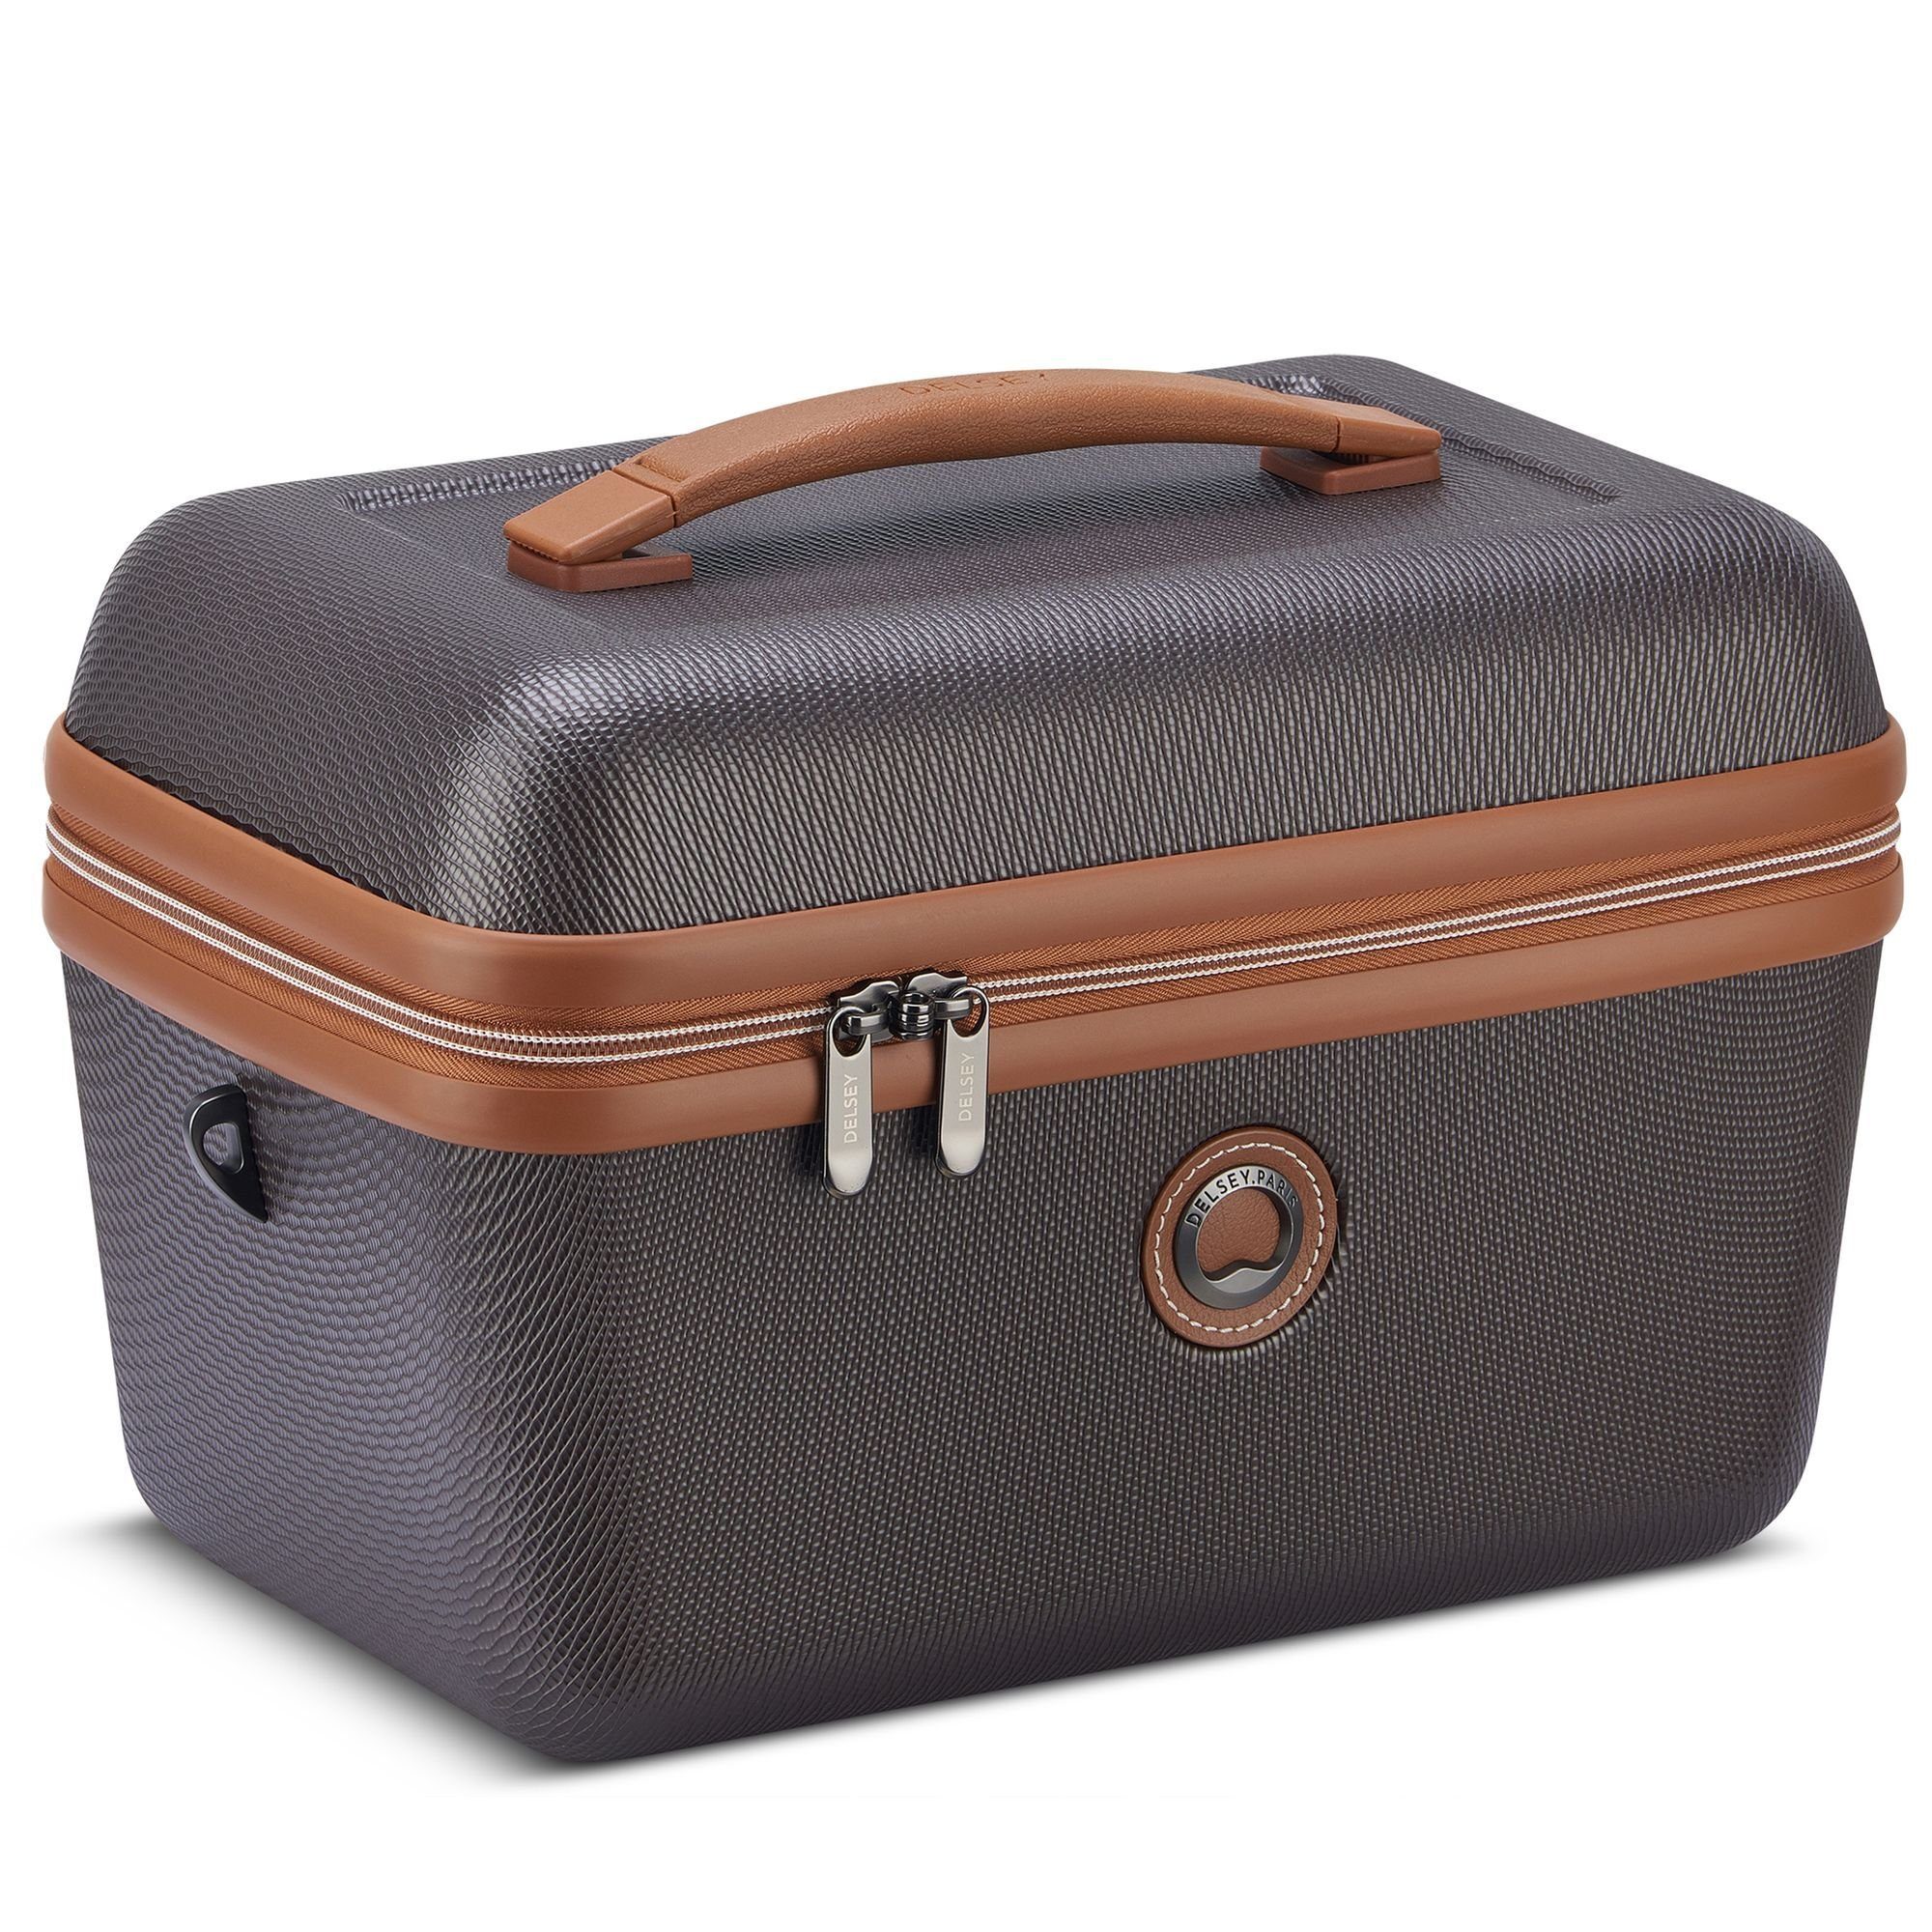 Air Beautycase Chatelet braun 2.0, Polycarbonat Delsey